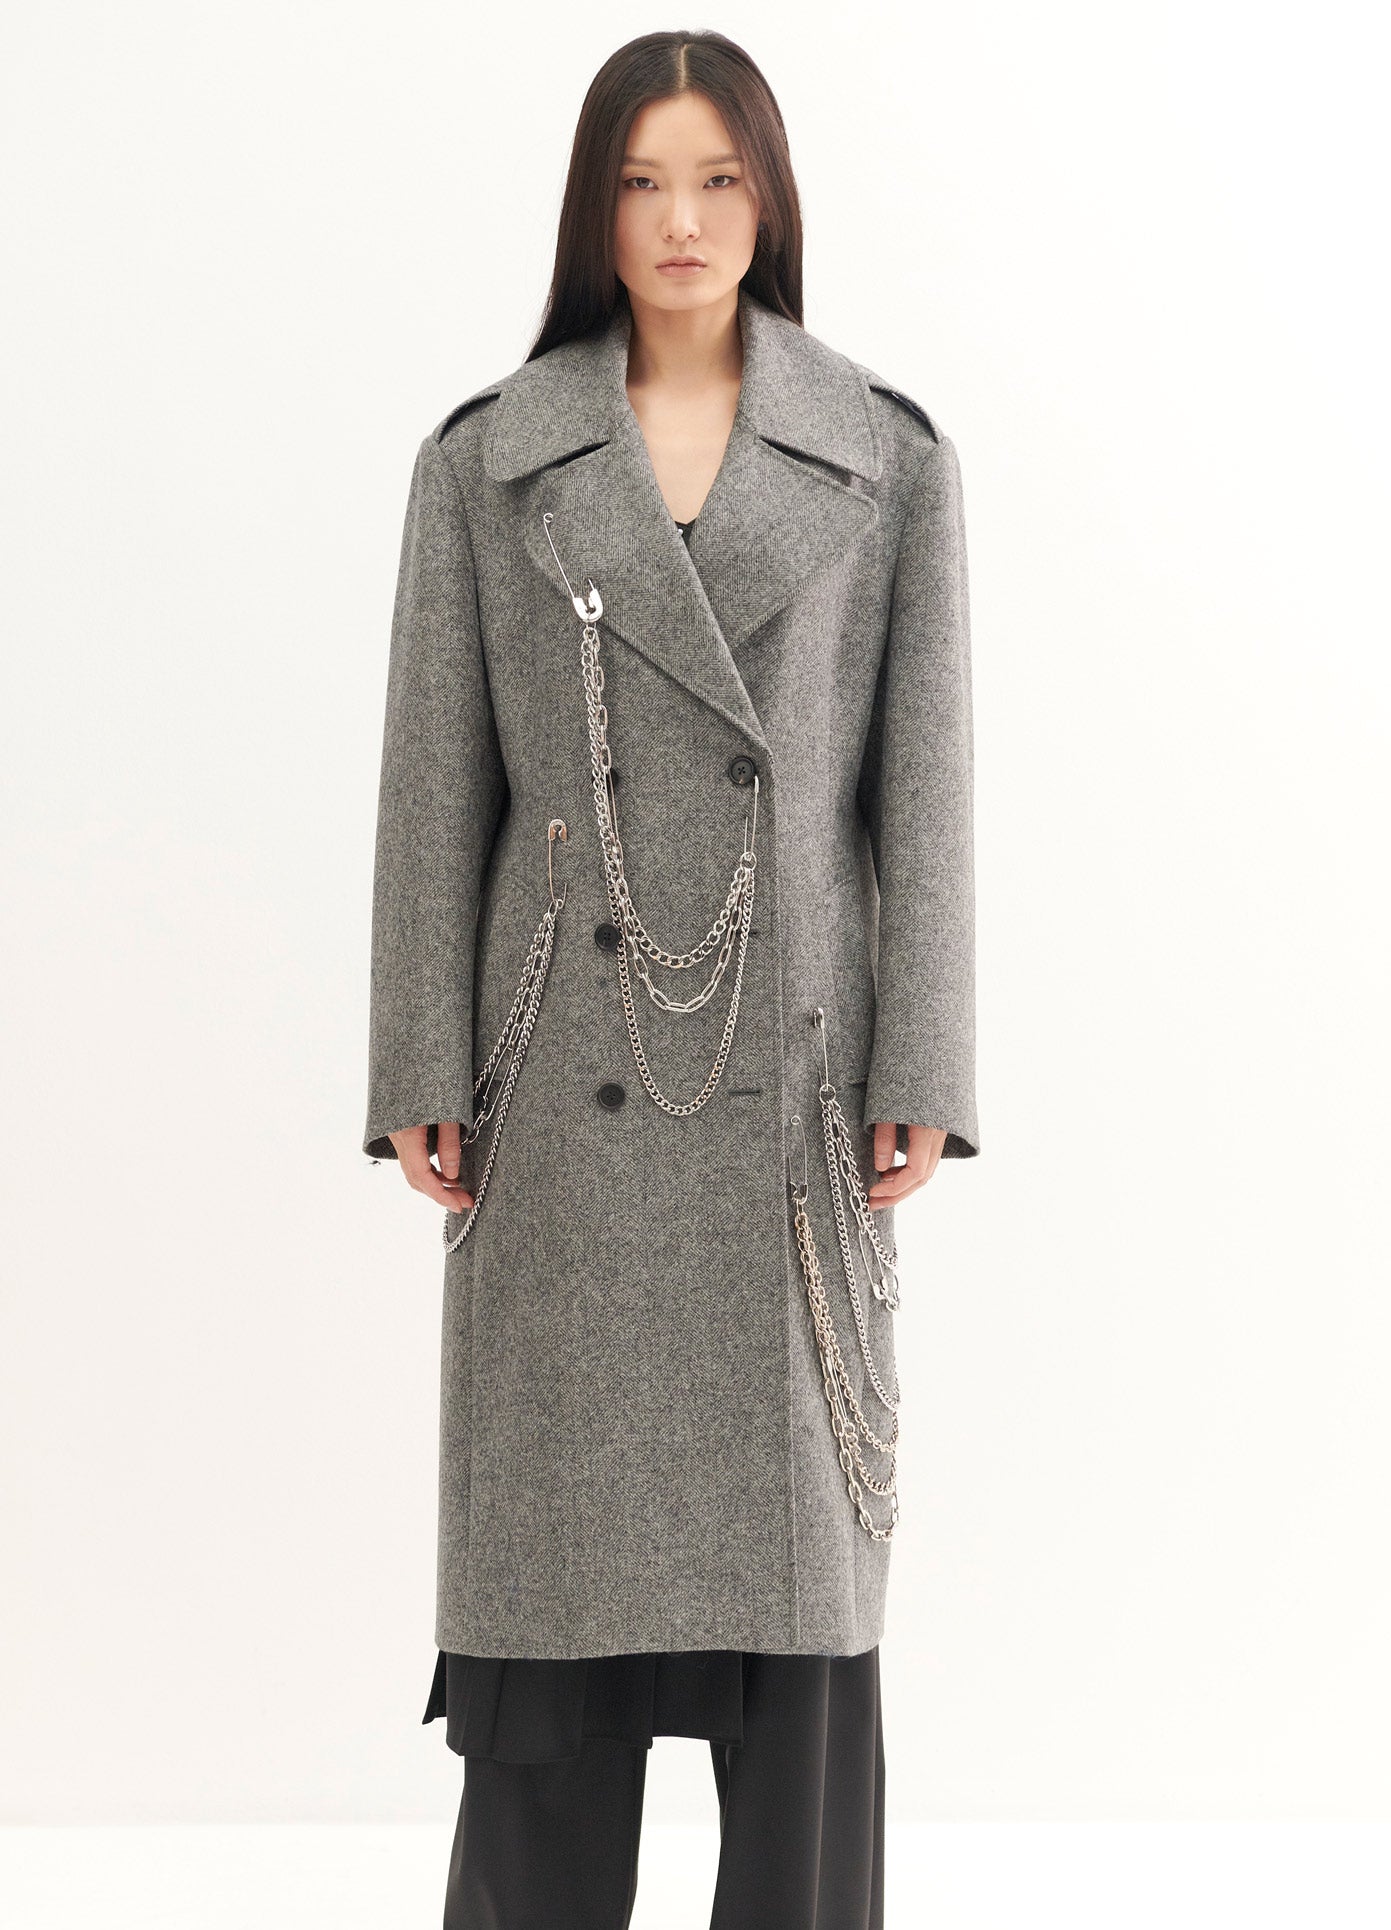 MONSE Chain Detail Coat in Charcoal on Model Front View